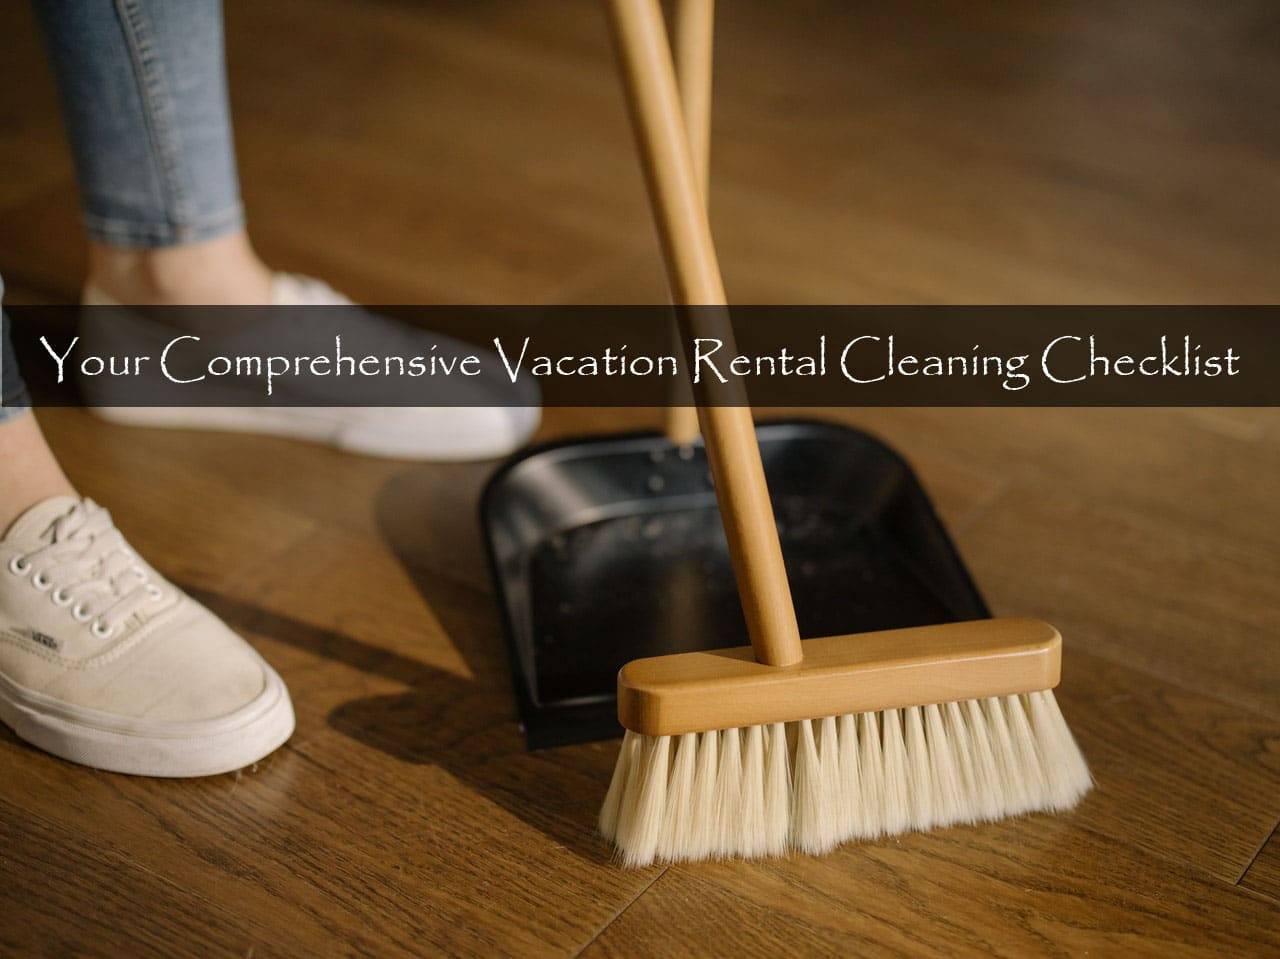 Vacation rental cleaning checklist